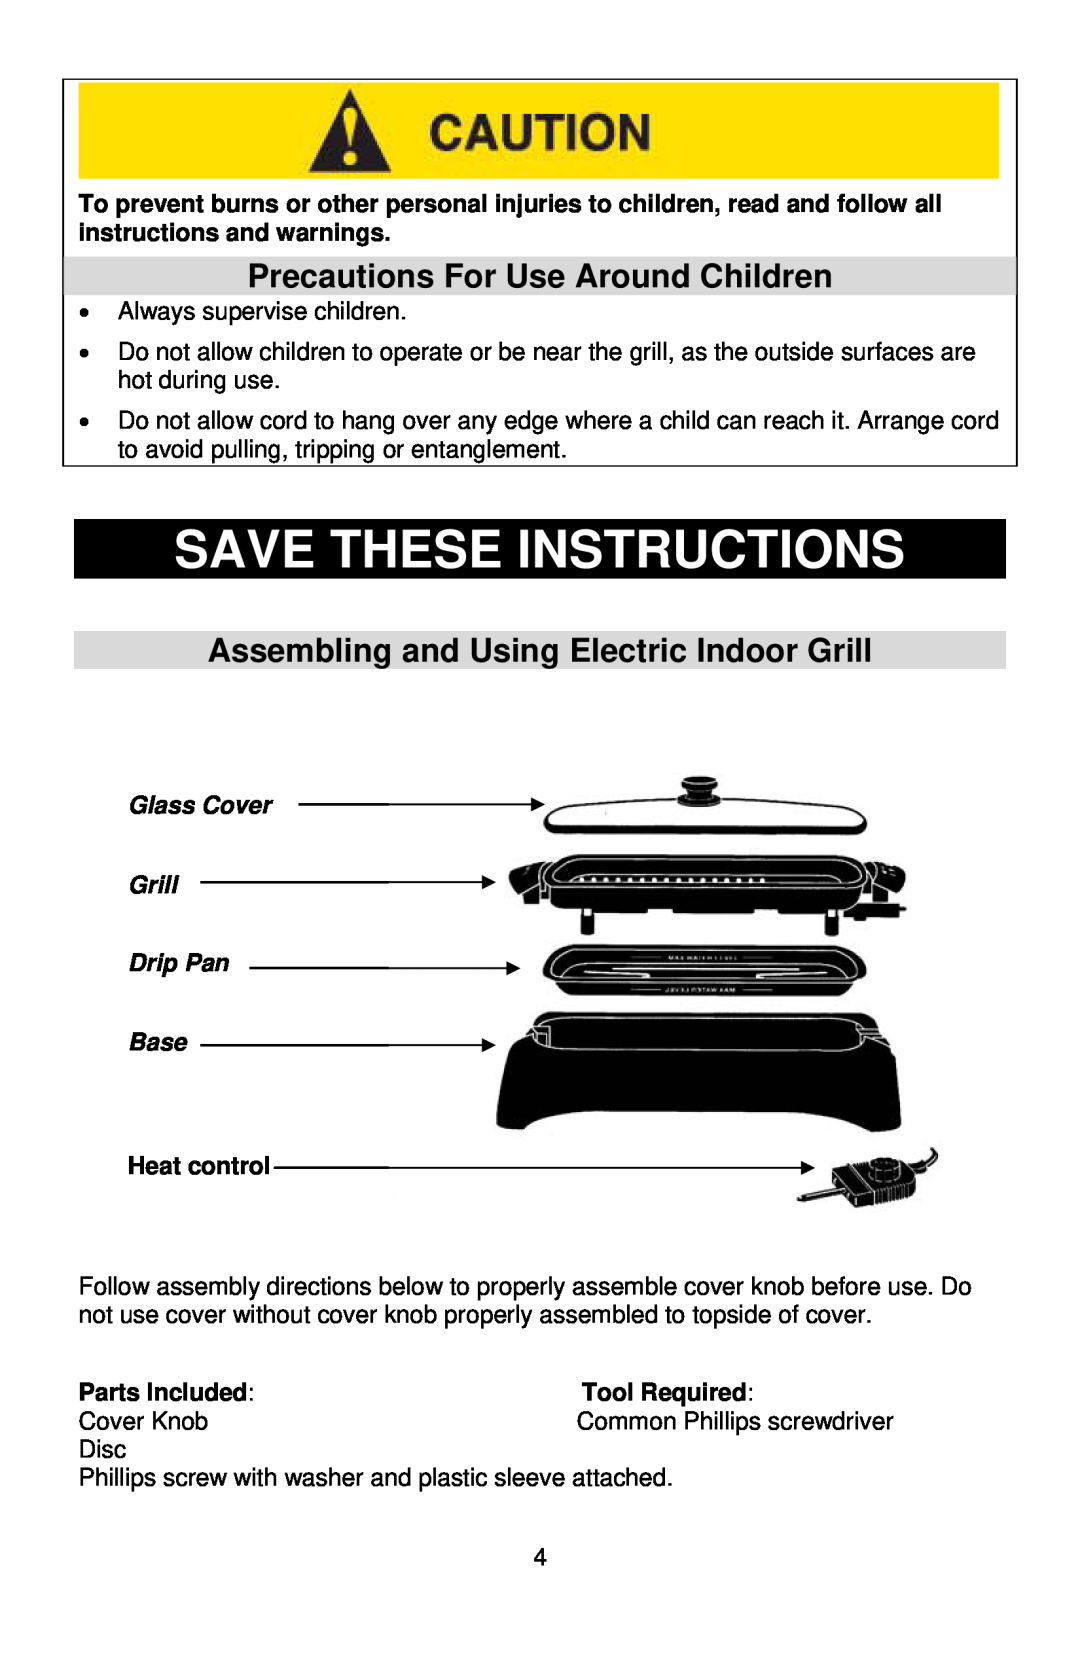 West Bend Electric Indoor Grill Save These Instructions, Glass Cover Grill Drip Pan Base, Heat control, Parts Included 